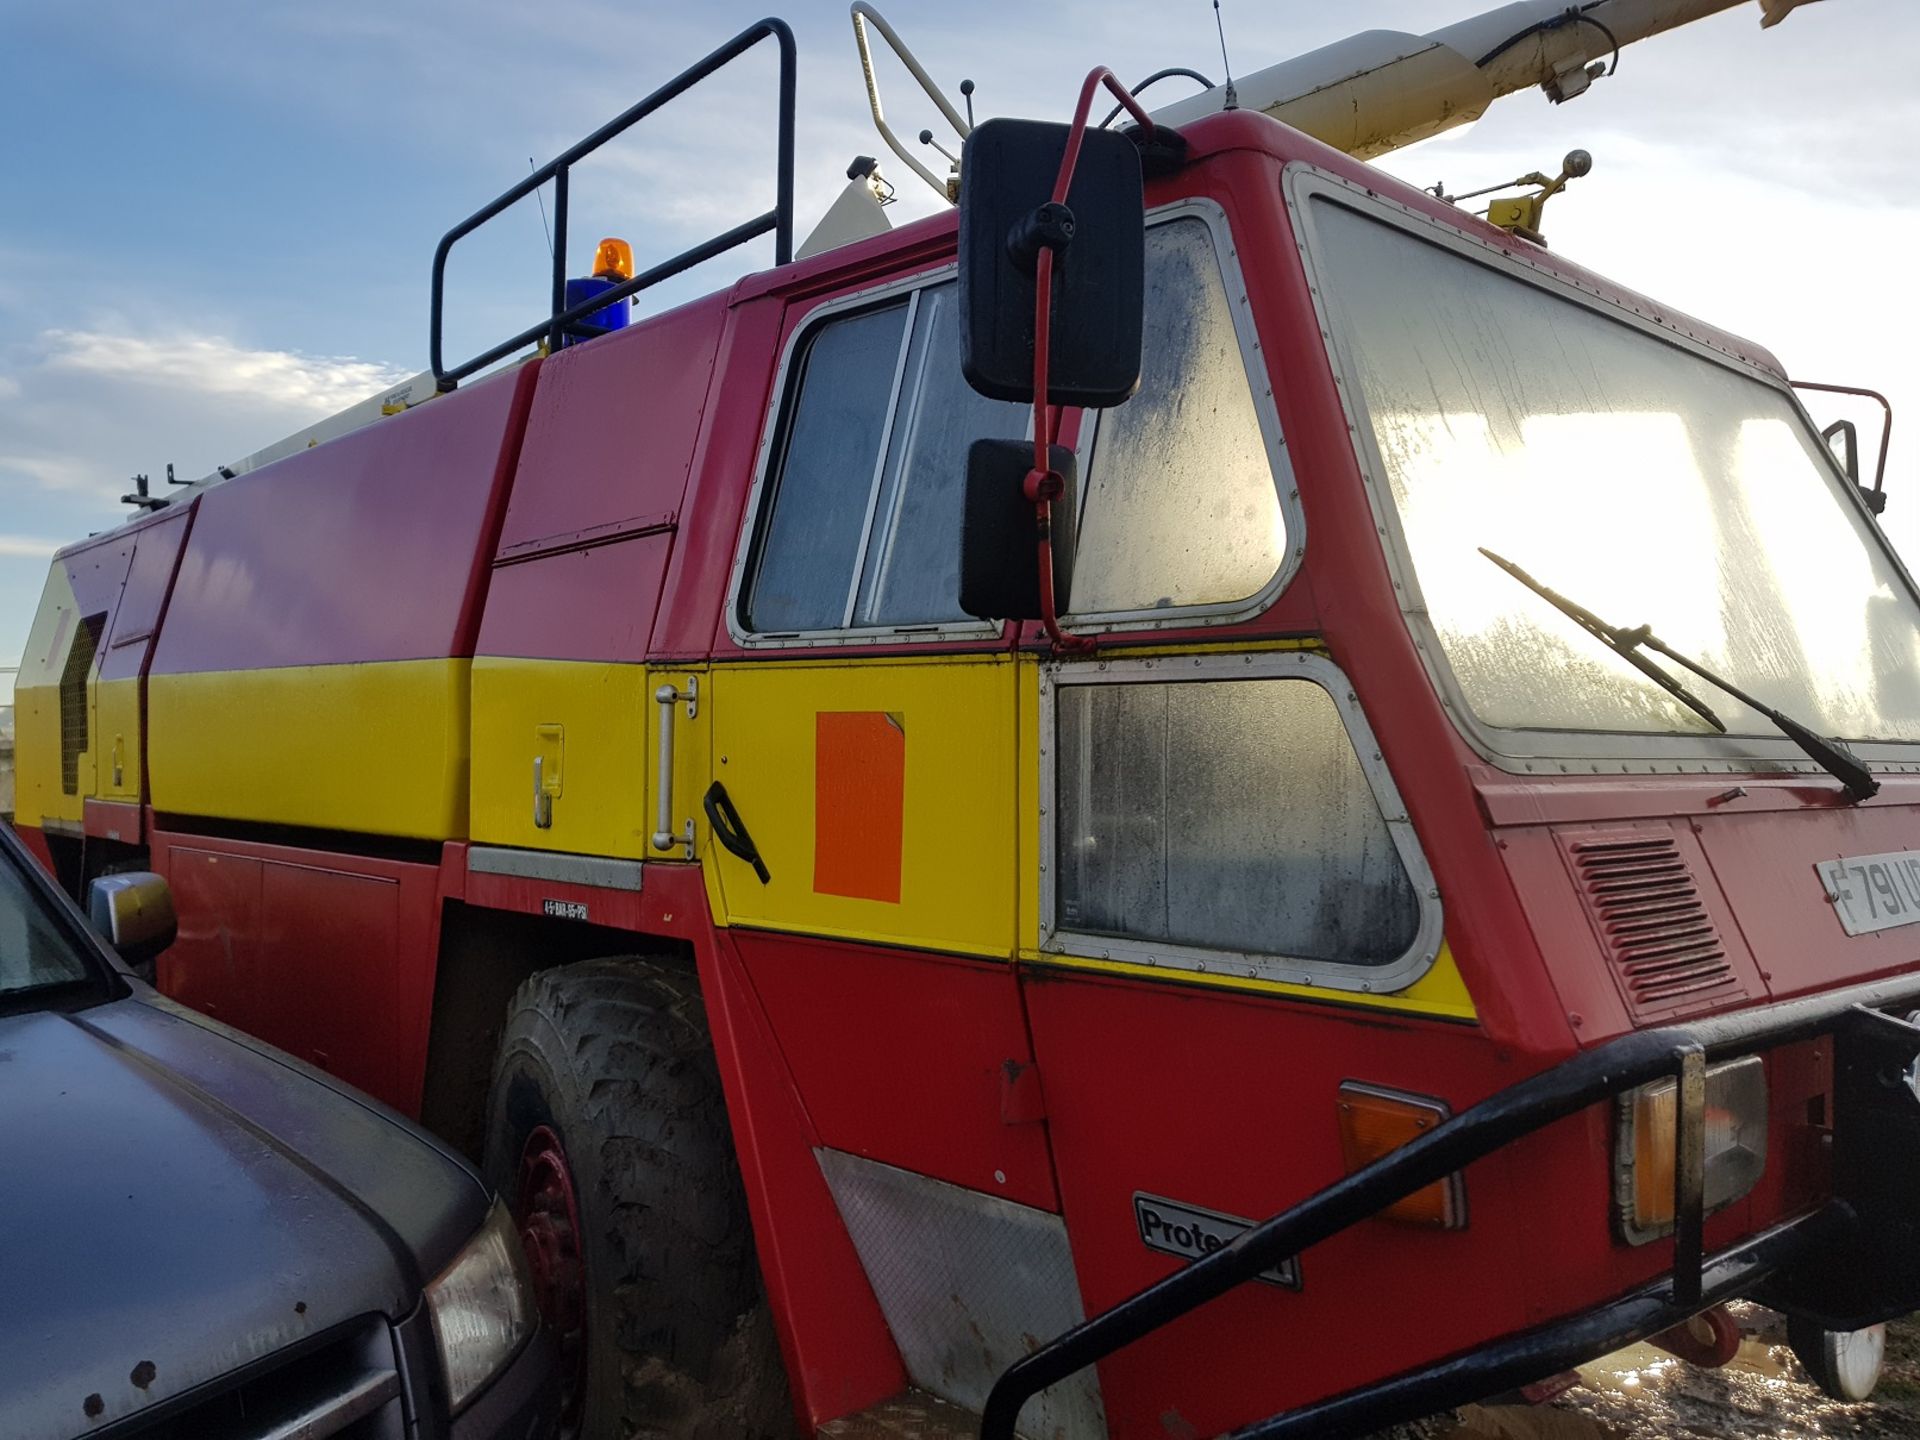 1989 SIMON GLOSTER SARO PROTECTOR FIRE ENGINE RED/YELLOW *PLUS VAT* - Image 2 of 5